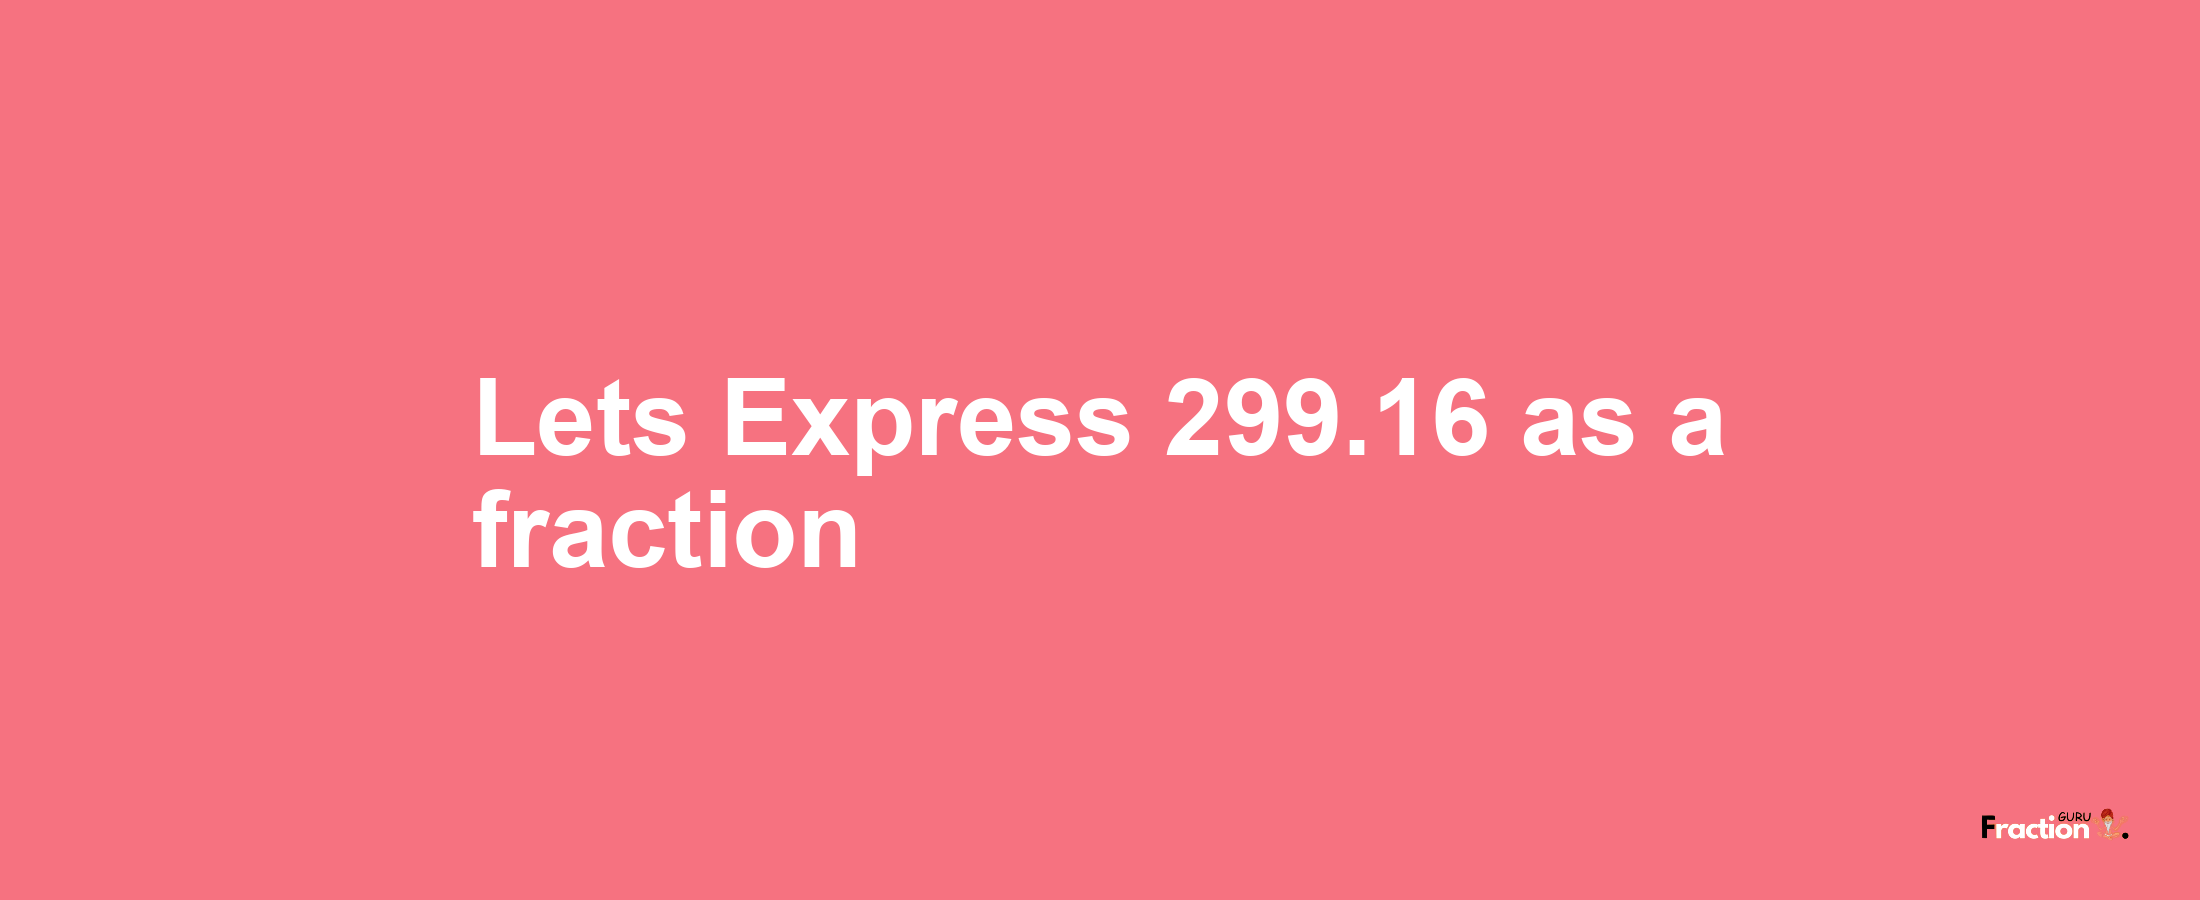 Lets Express 299.16 as afraction